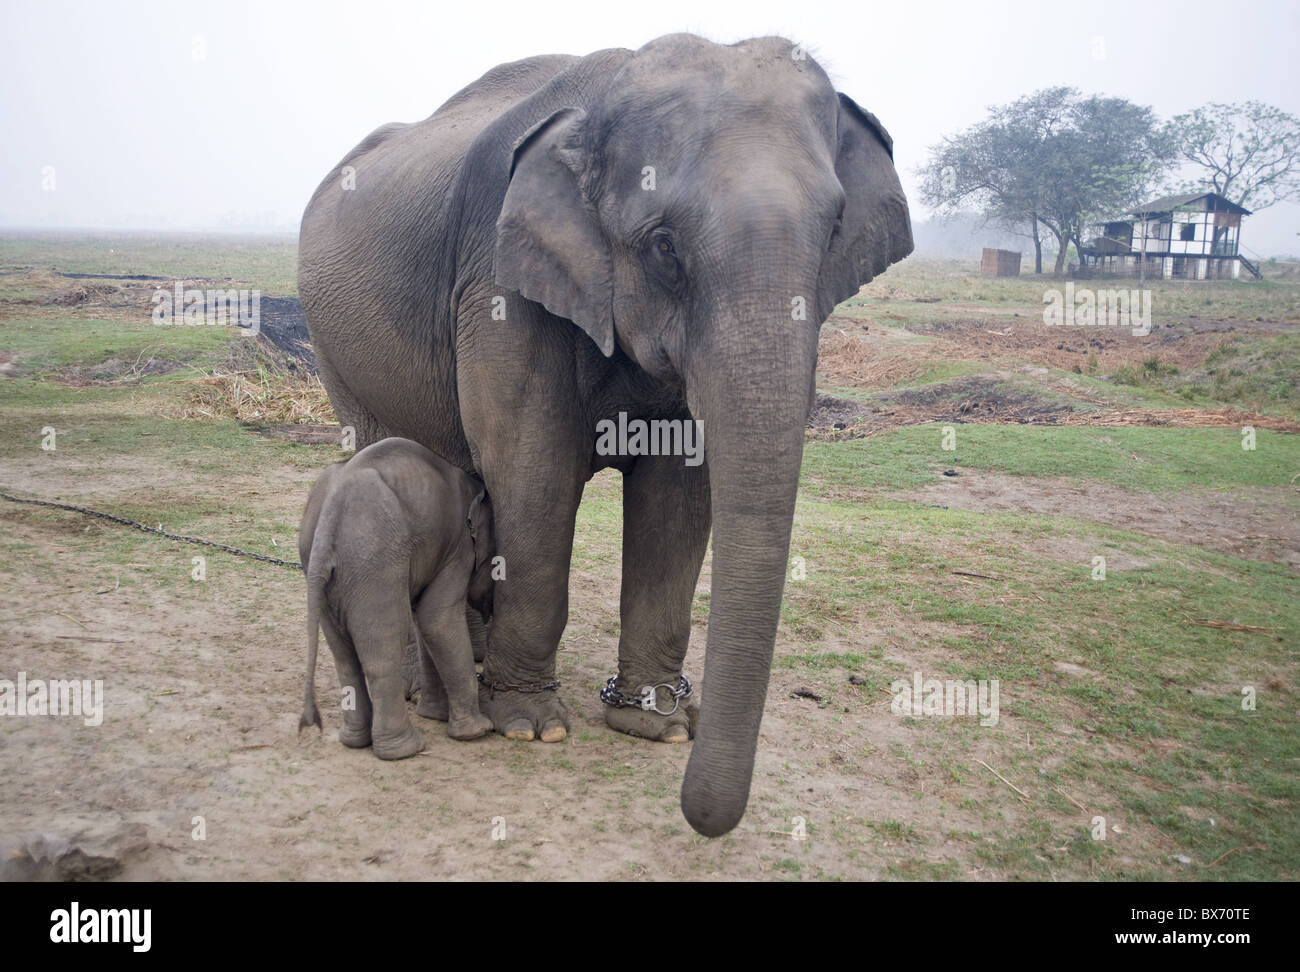 Two month old baby calf nuzzling mother elephant to suckle, Kaziranga National Park, Assam, India, Asia Stock Photo